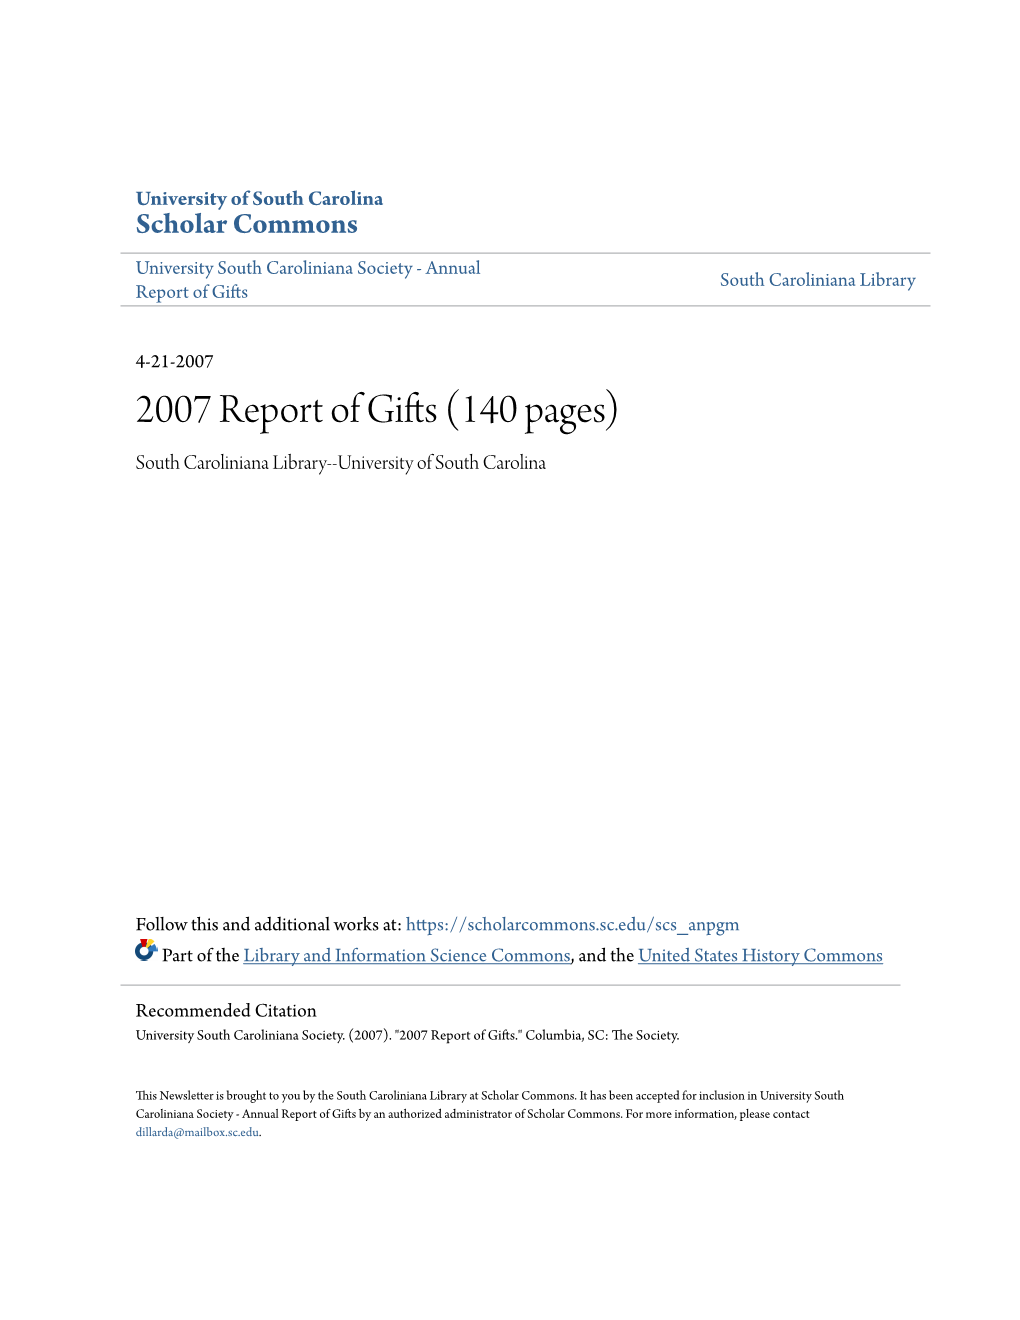 2007 Report of Gifts (140 Pages) South Caroliniana Library--University of South Carolina